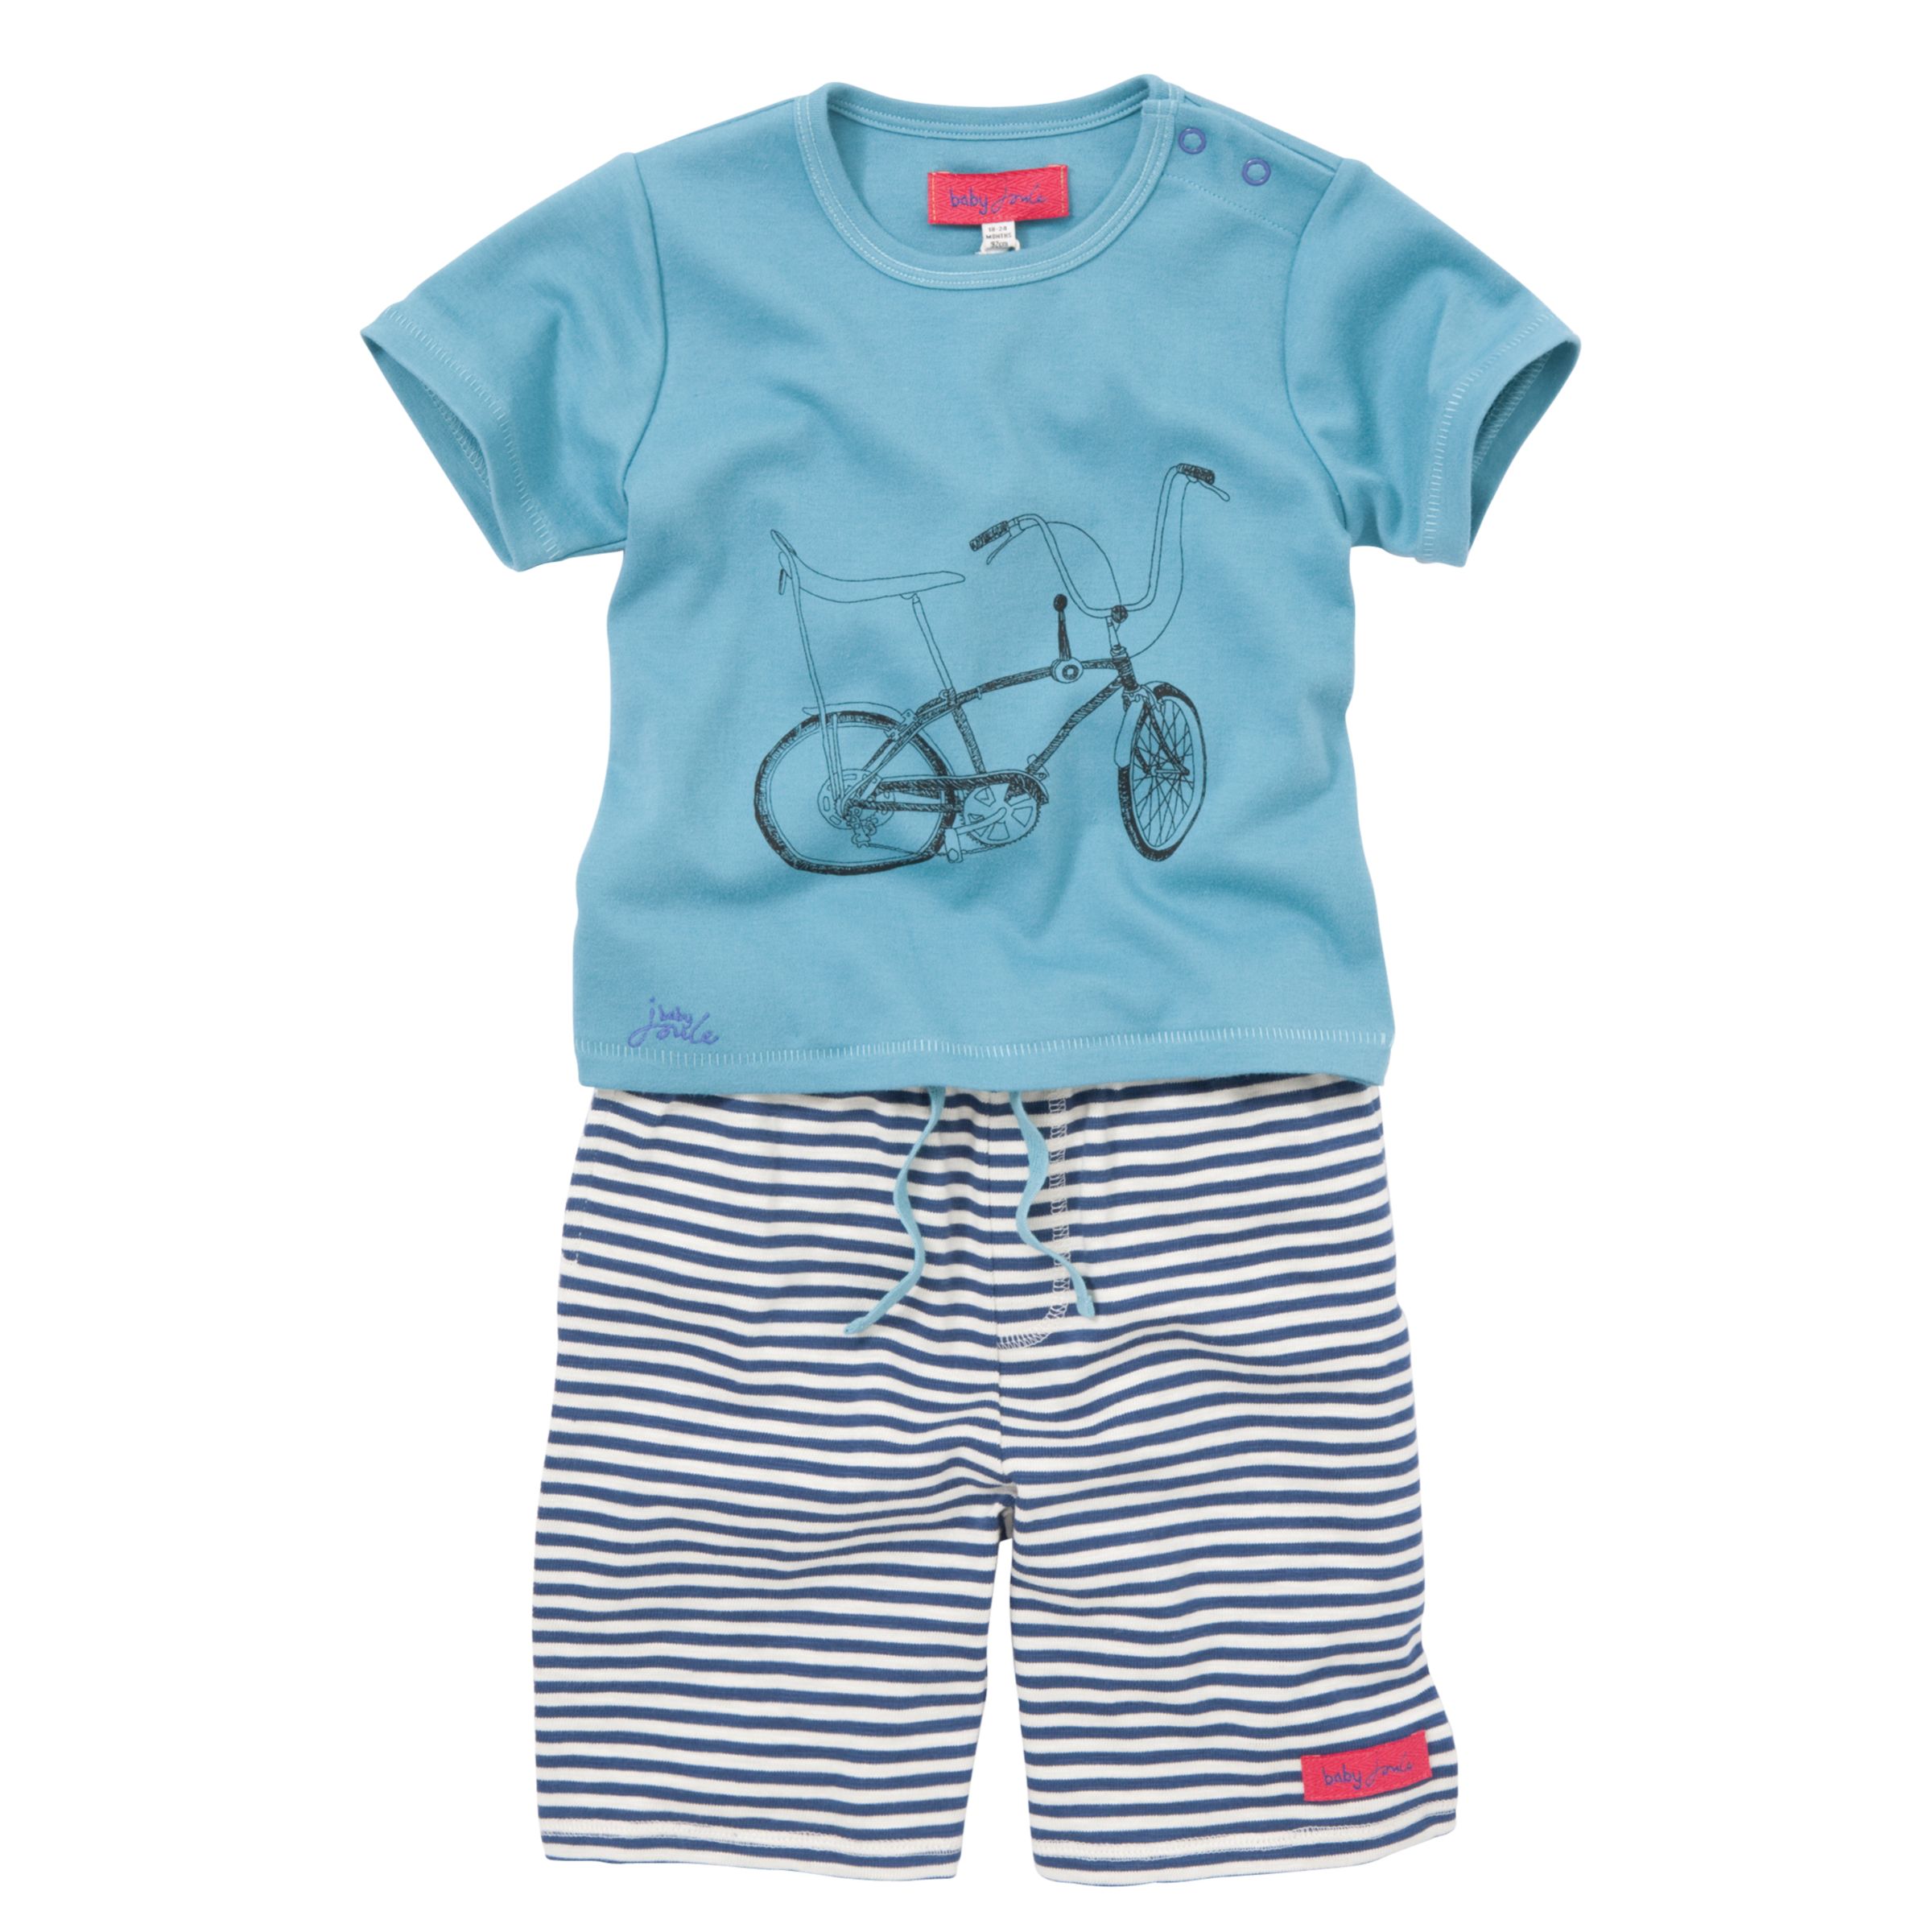 Baby Joules Go Cart T-Shirt and Shorts Set, Blue